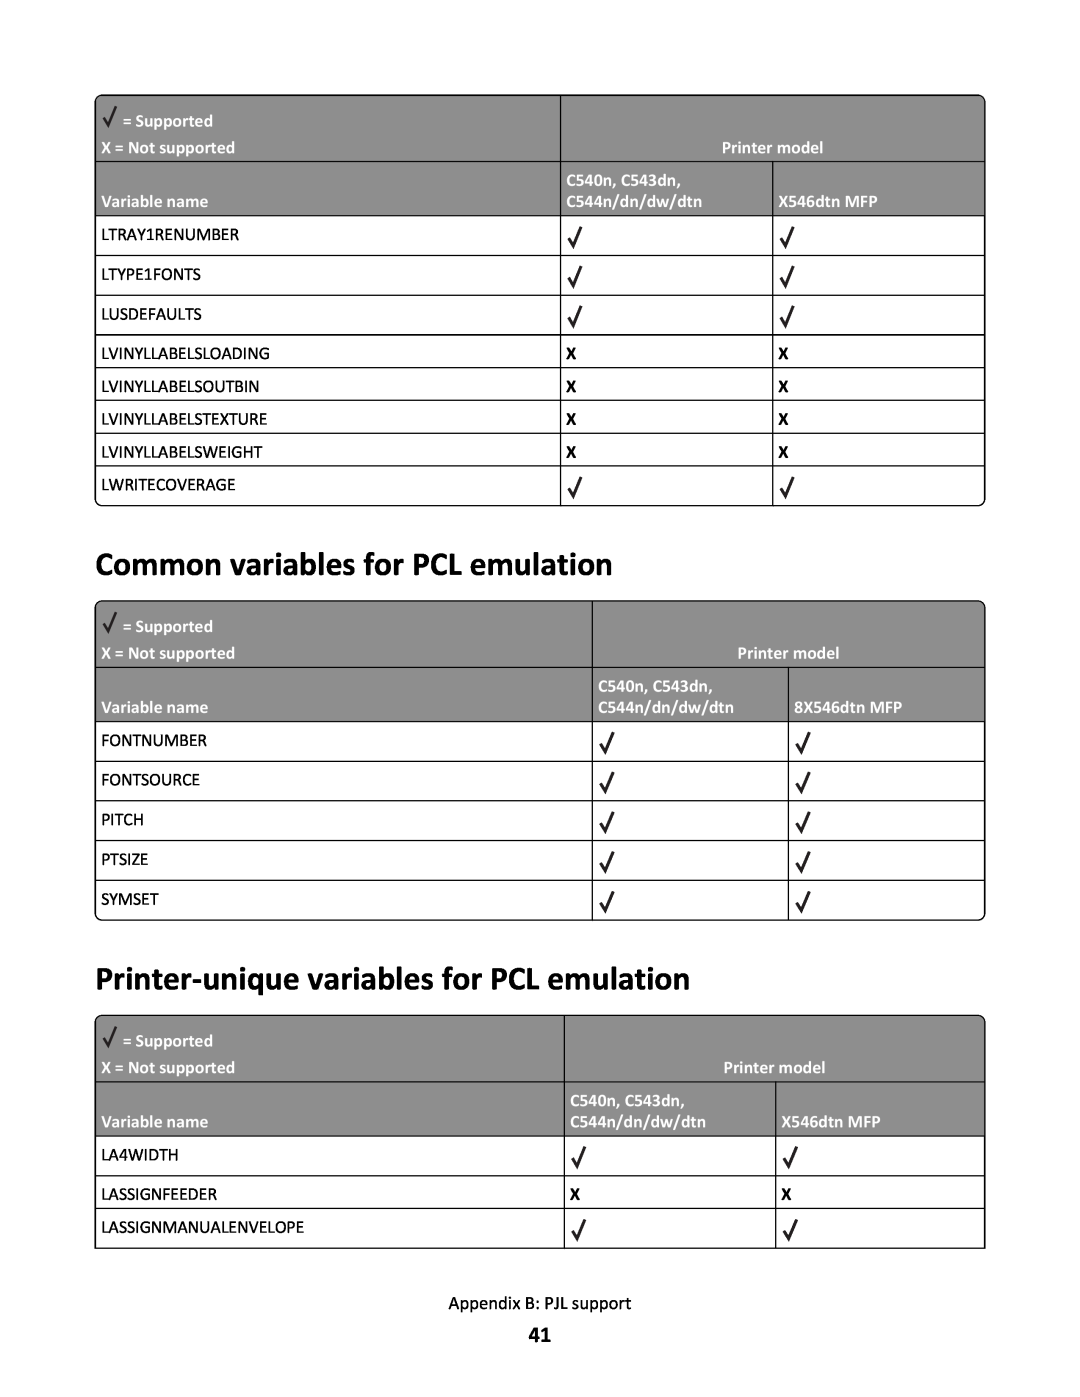 Lexmark X546DTN MFP Common variables for PCL emulation, Printer-unique variables for PCL emulation, = Supported, LA4WIDTH 